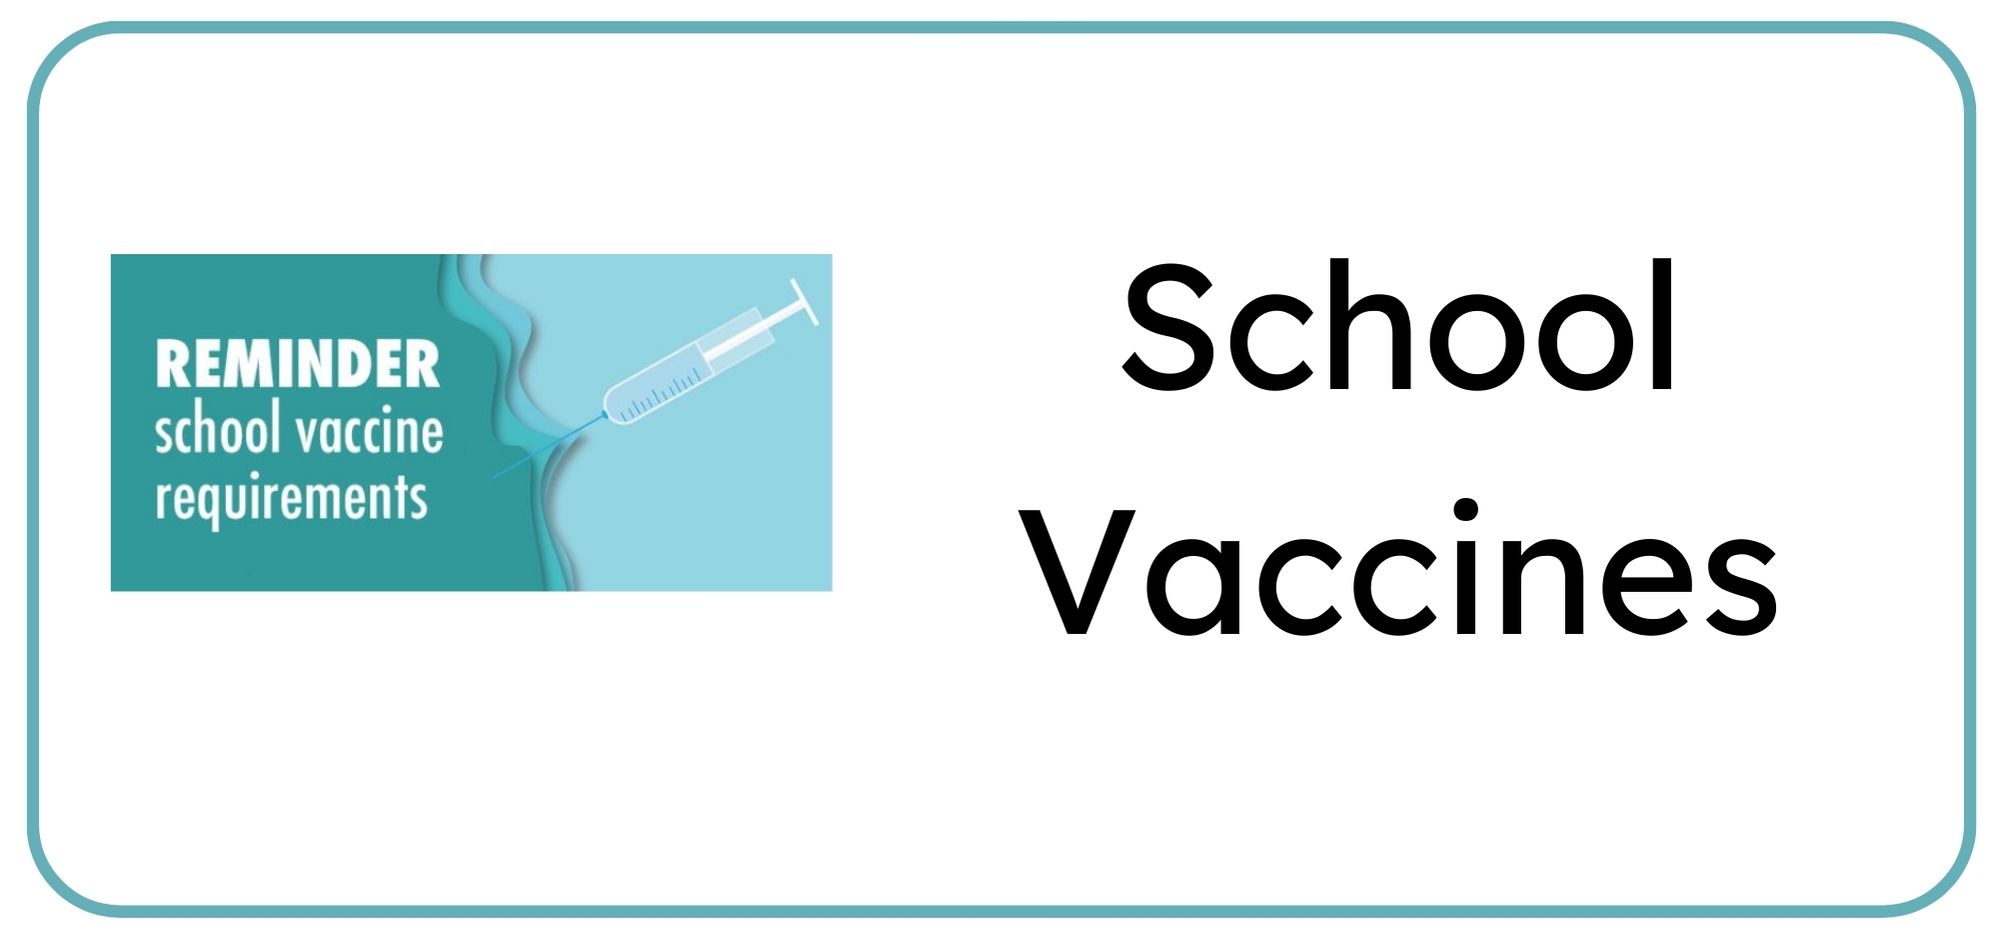 State Vaccine Requirements